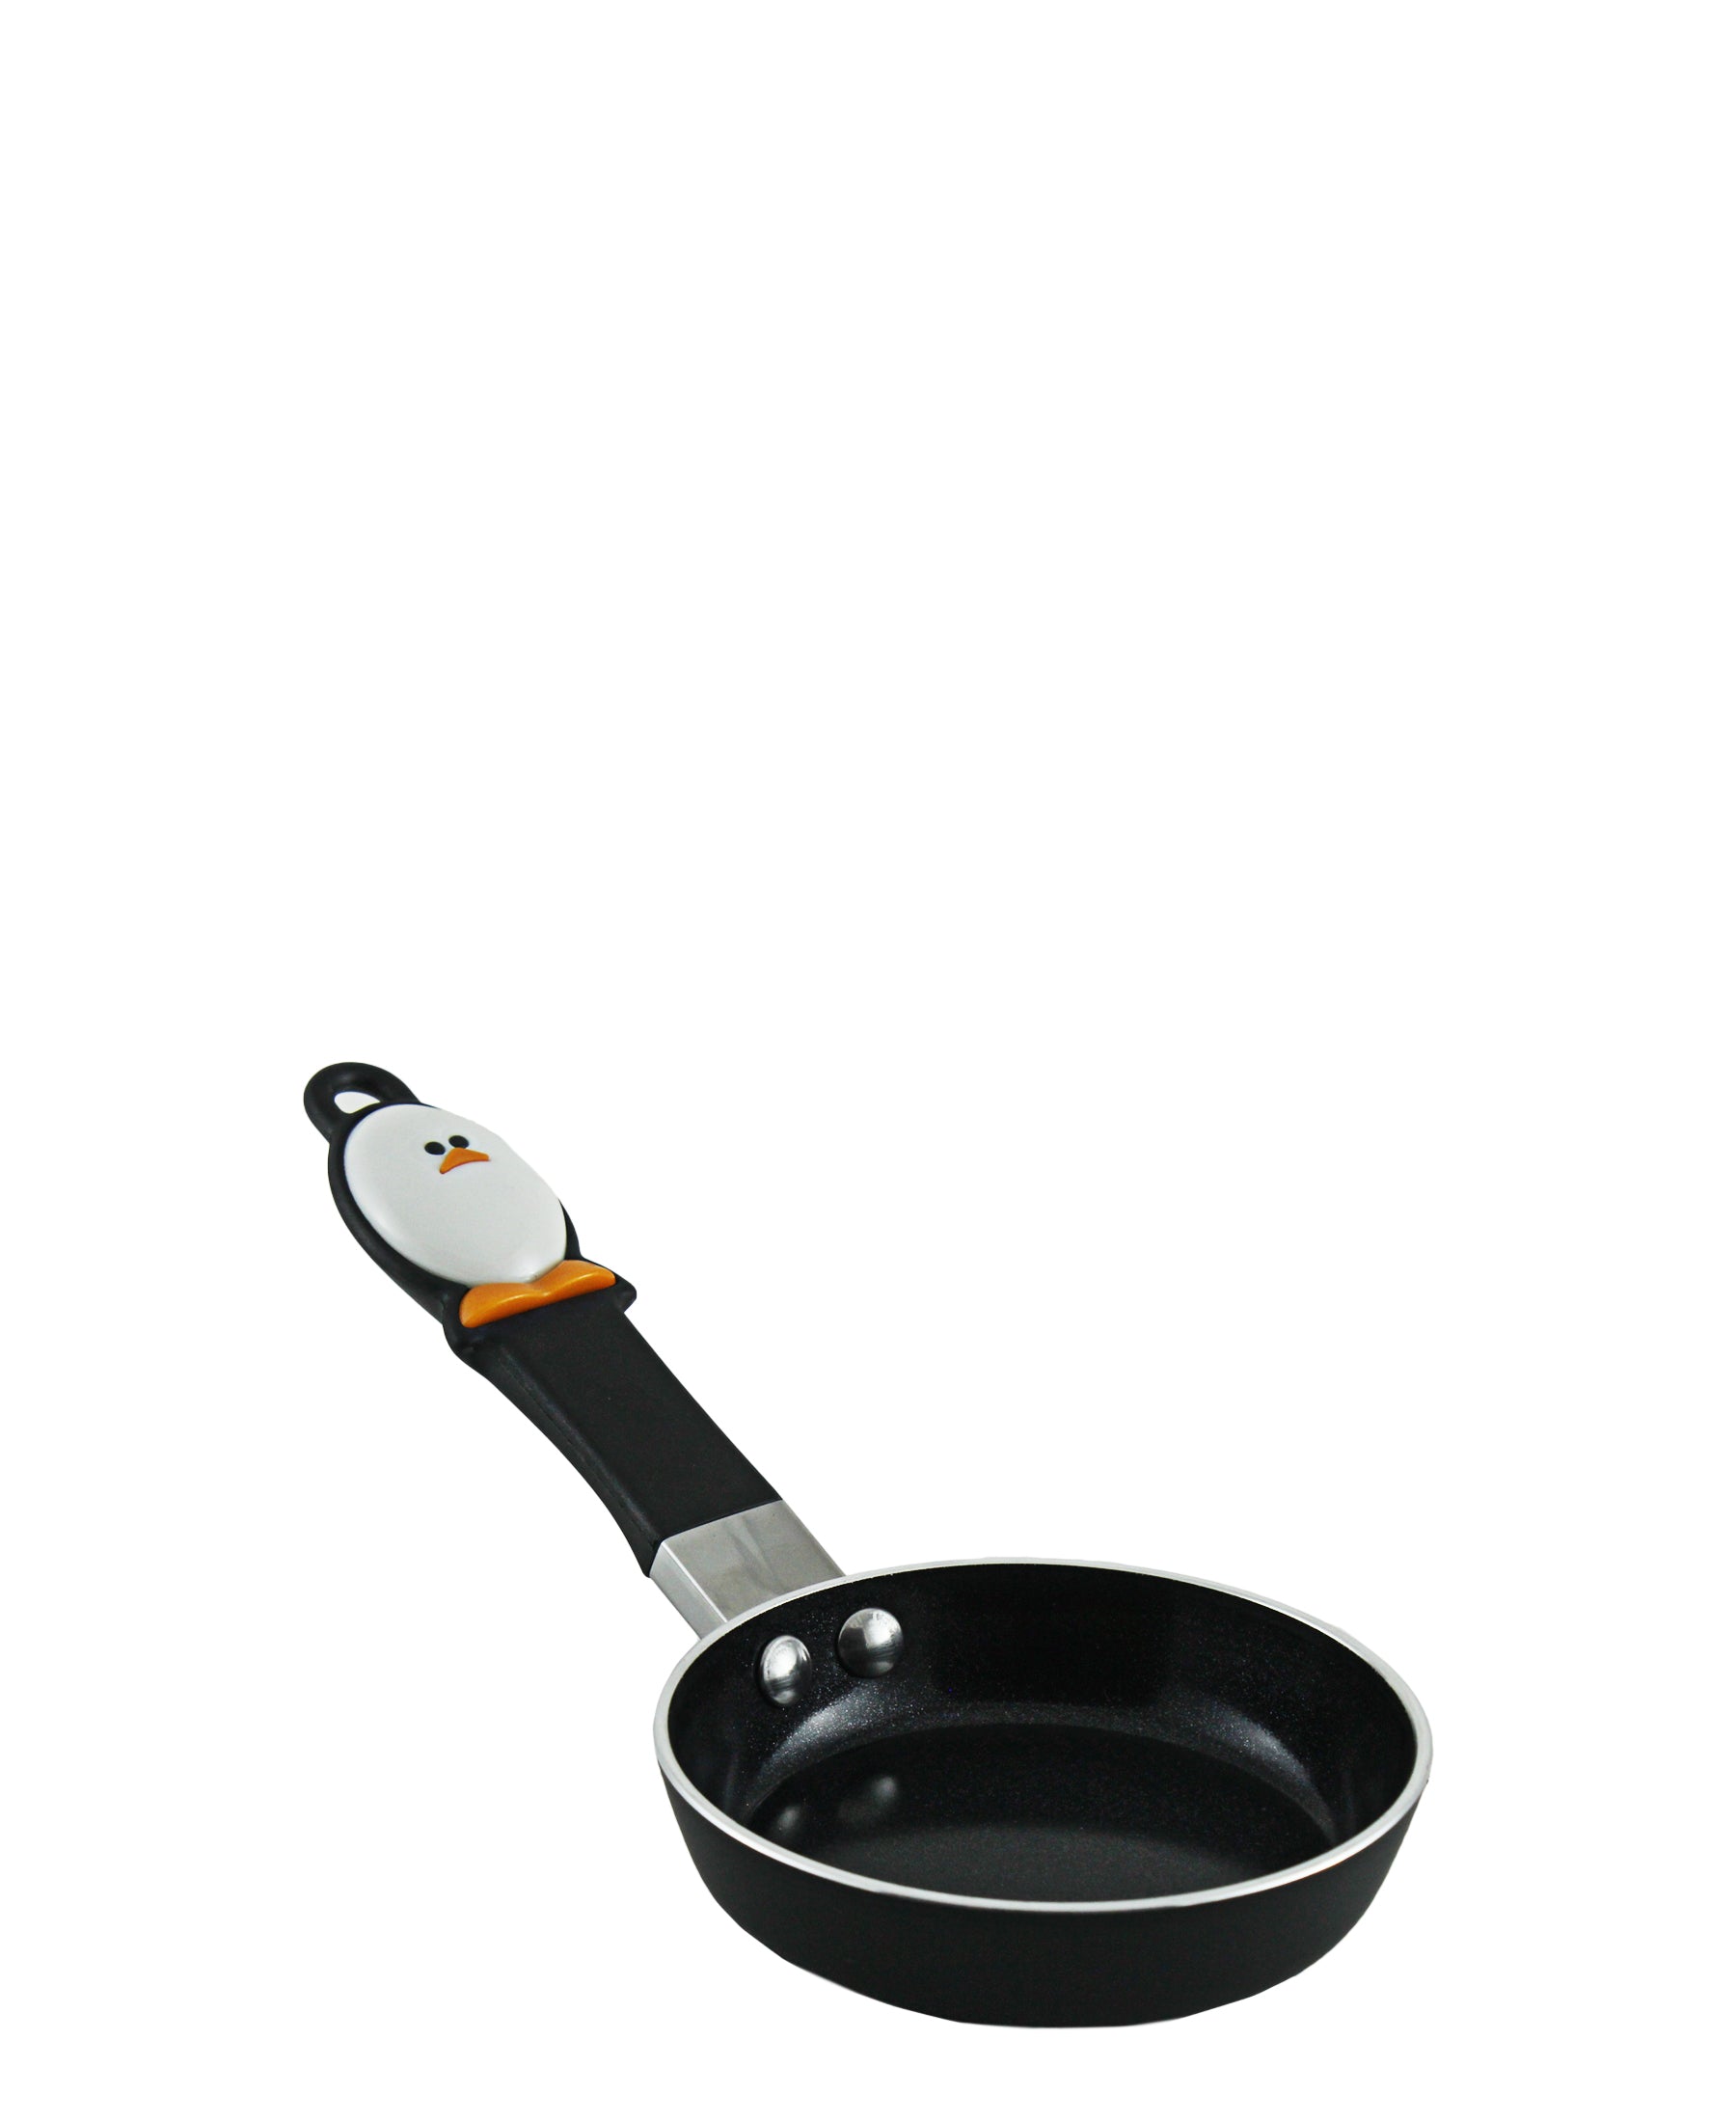 Joie Mini Nonstick Egg and Fry Pan - Black